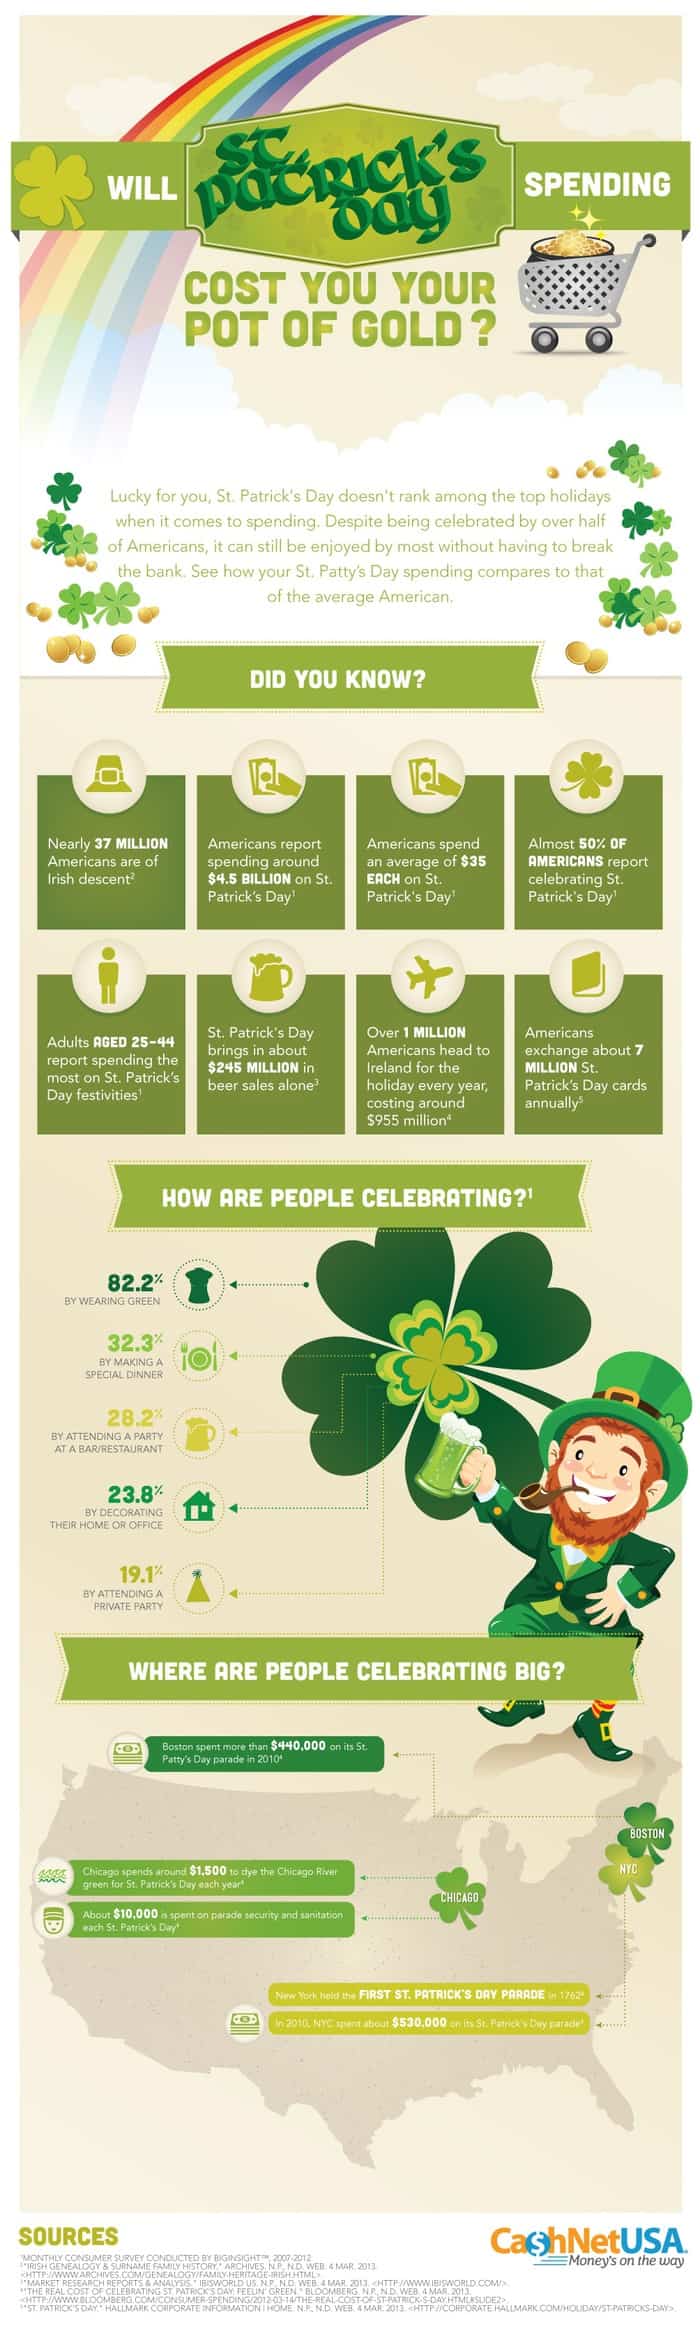 Will-St.-Patricks-Day-Spending-Cost-You-Your-Pot-of-Gold_-Infographic